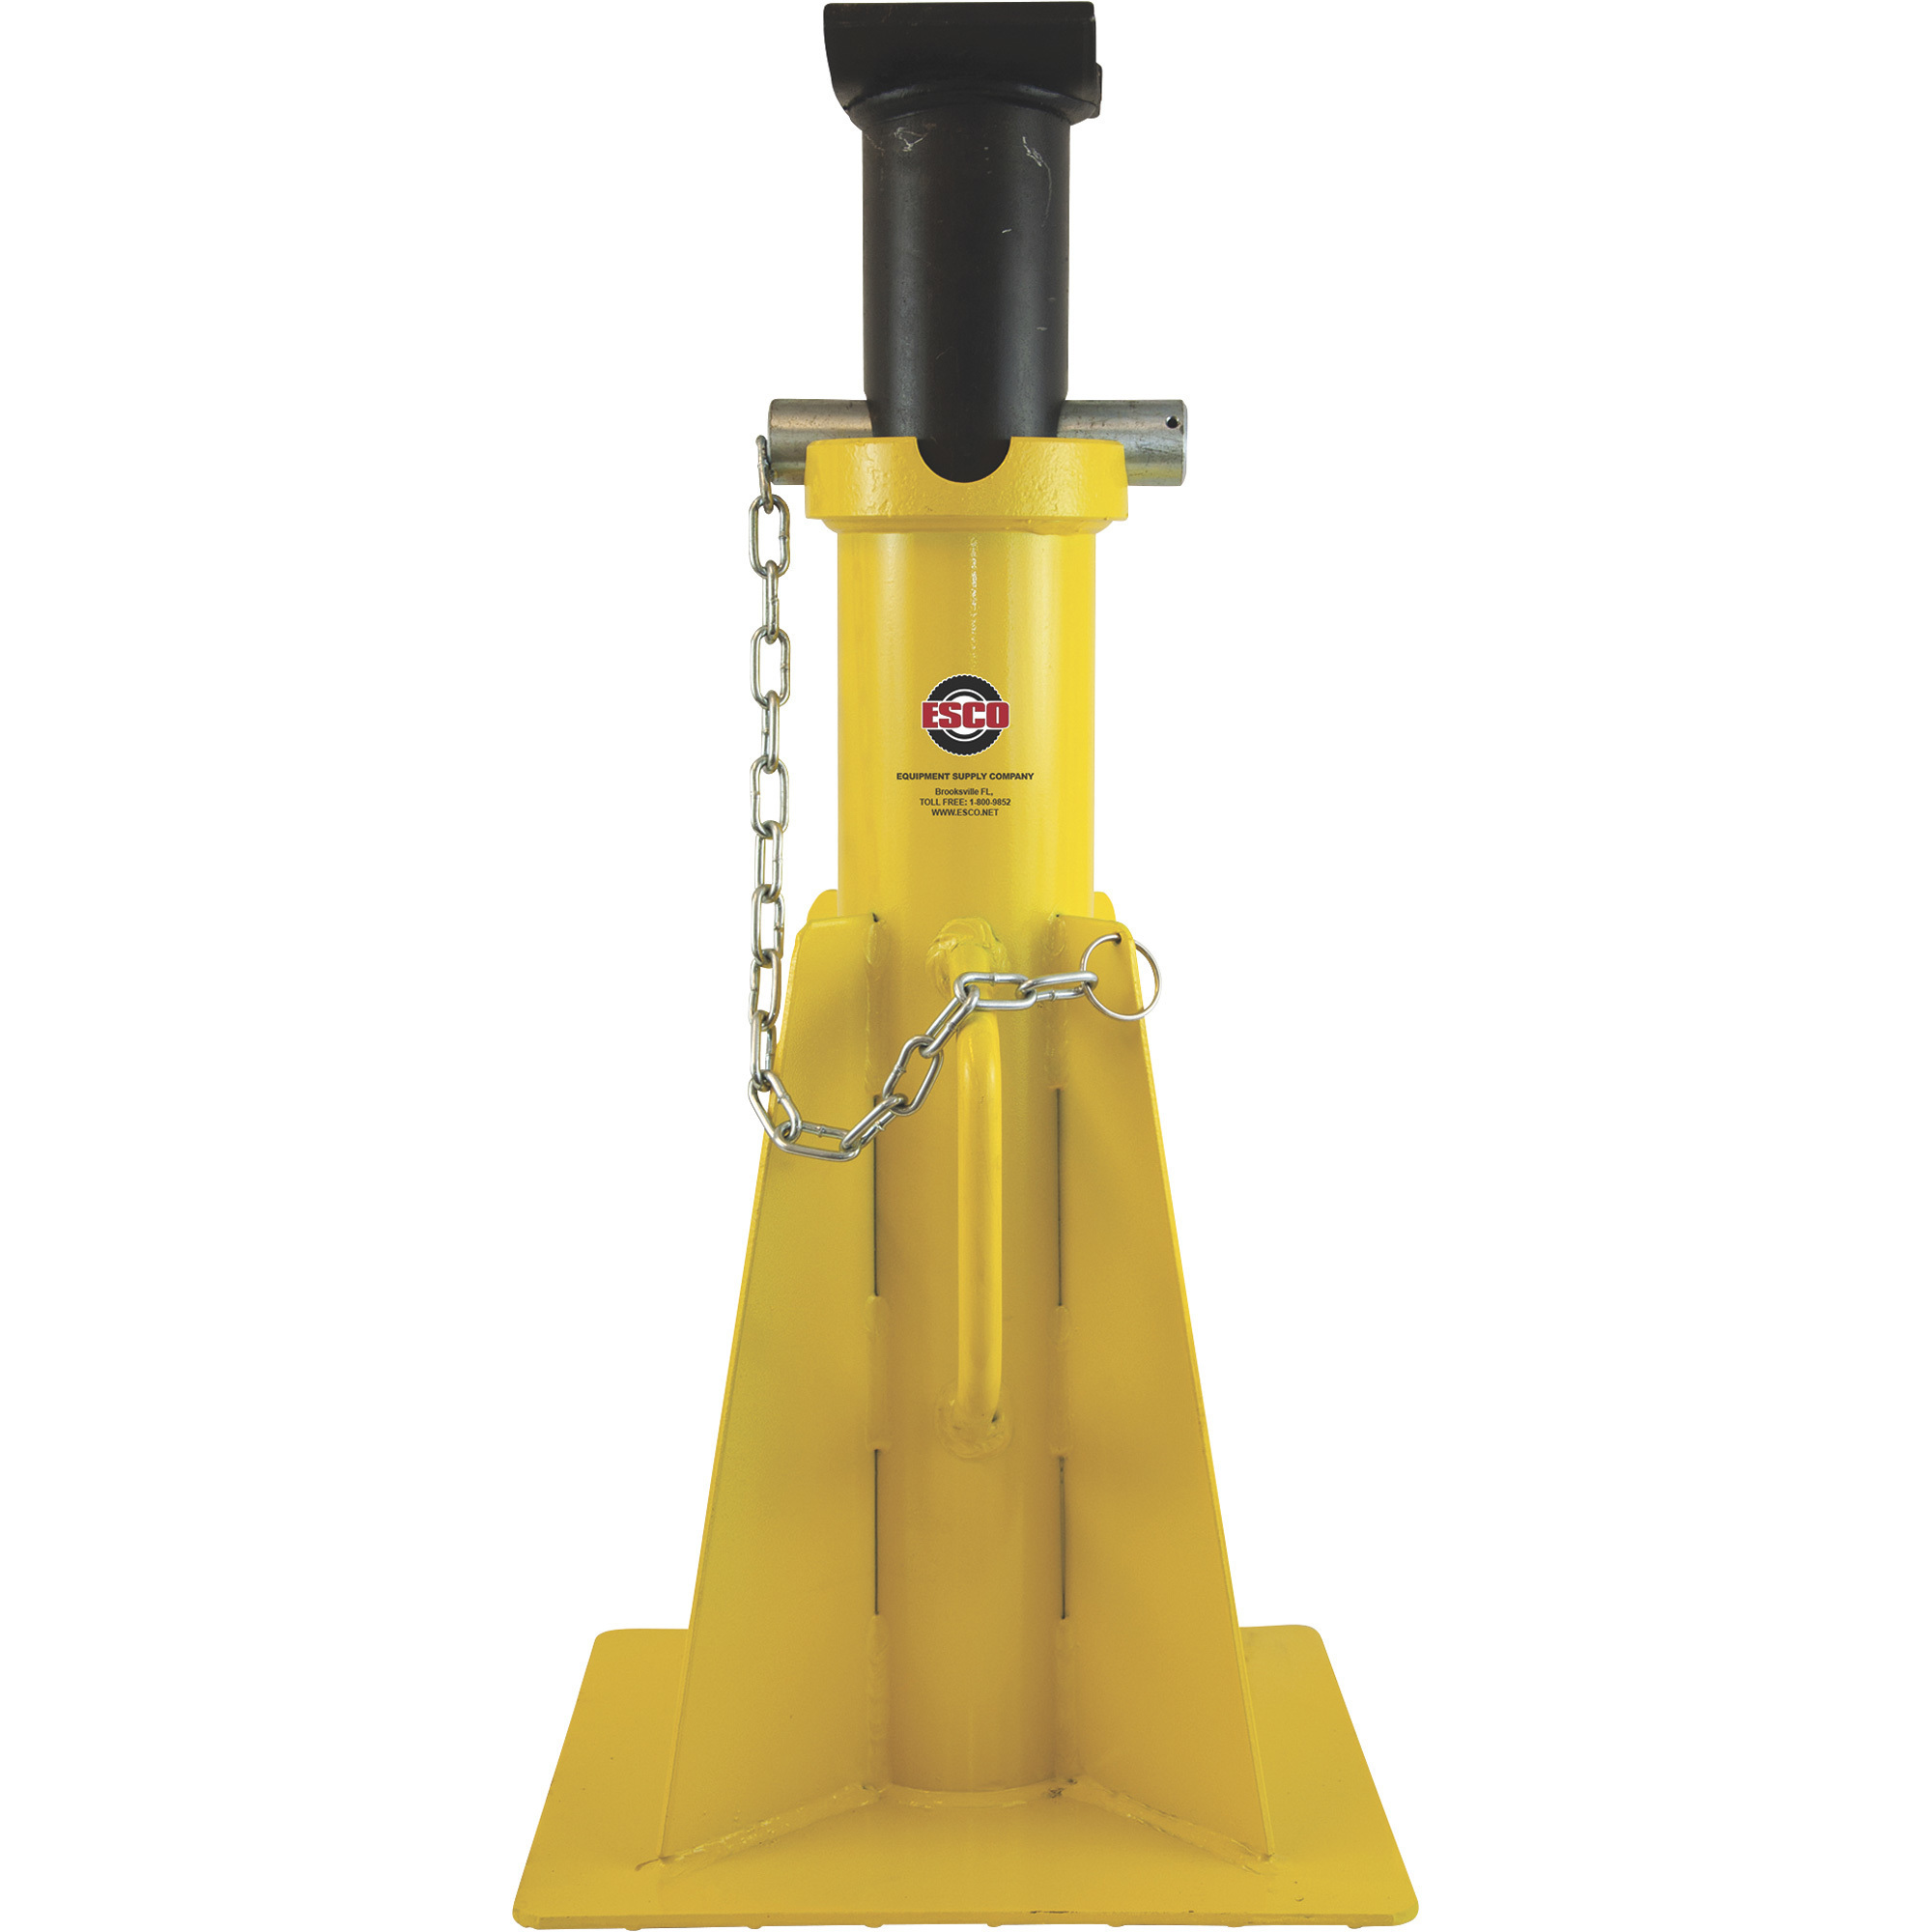 ESCO Pin-Style Jack Stand â 25-Ton Capacity, Model 10805